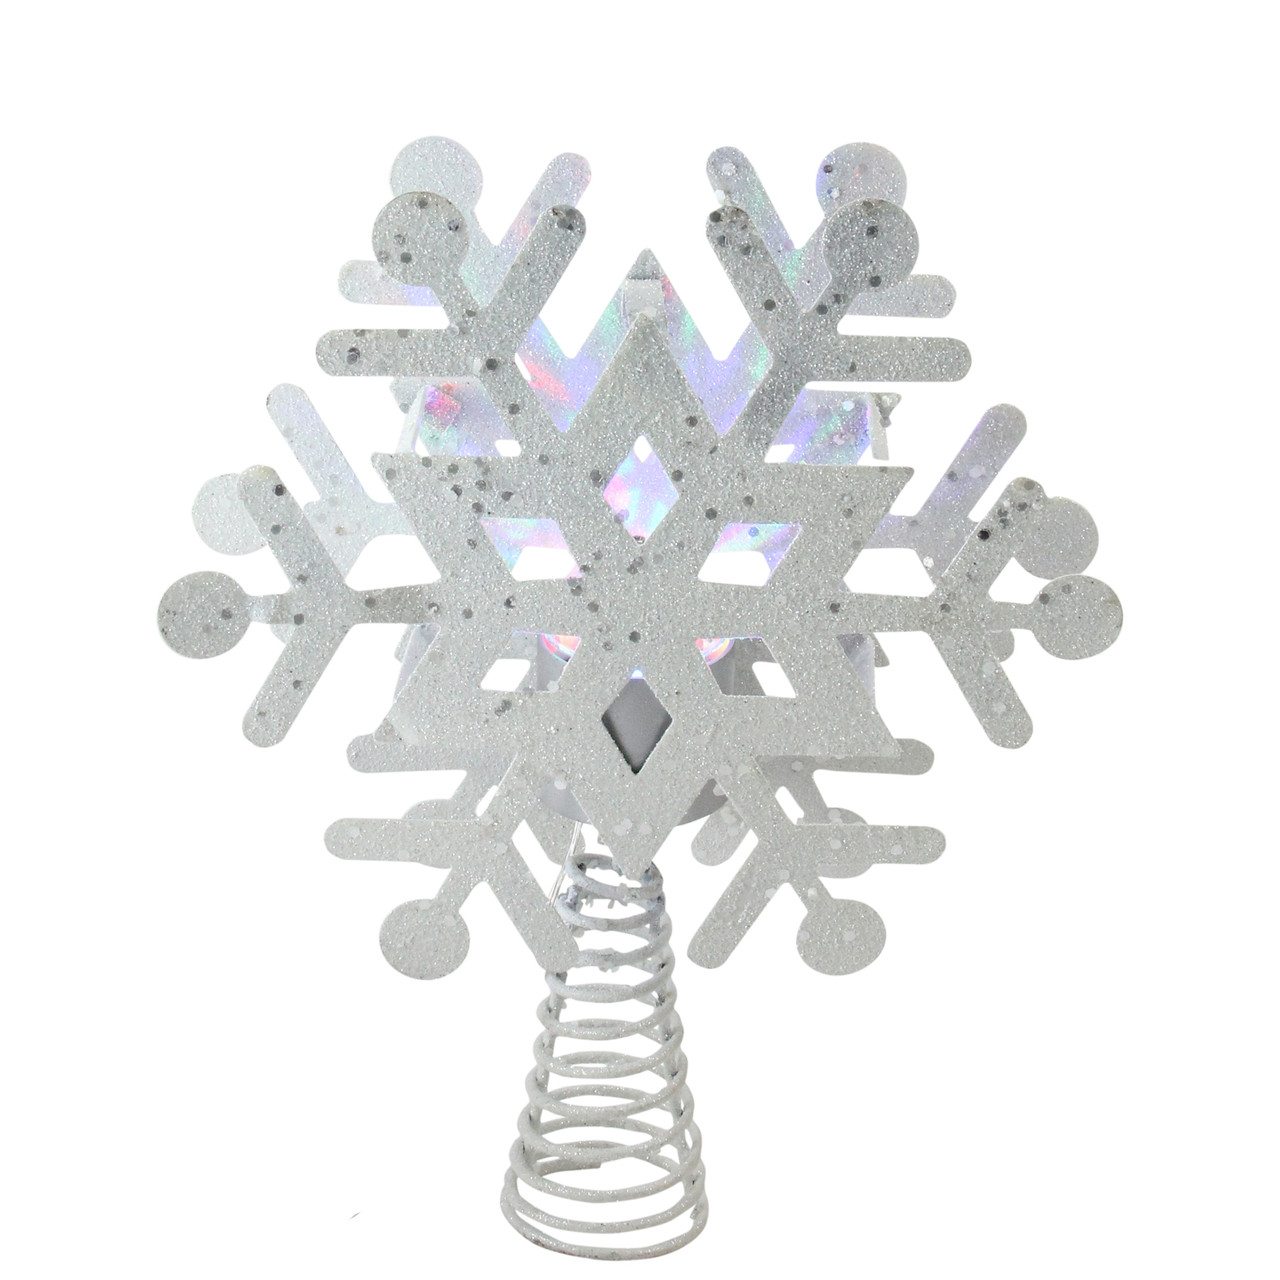 11.5" LED Lighted Decorative Snowflake Christmas Tree Topper with Projector | Christmas Central